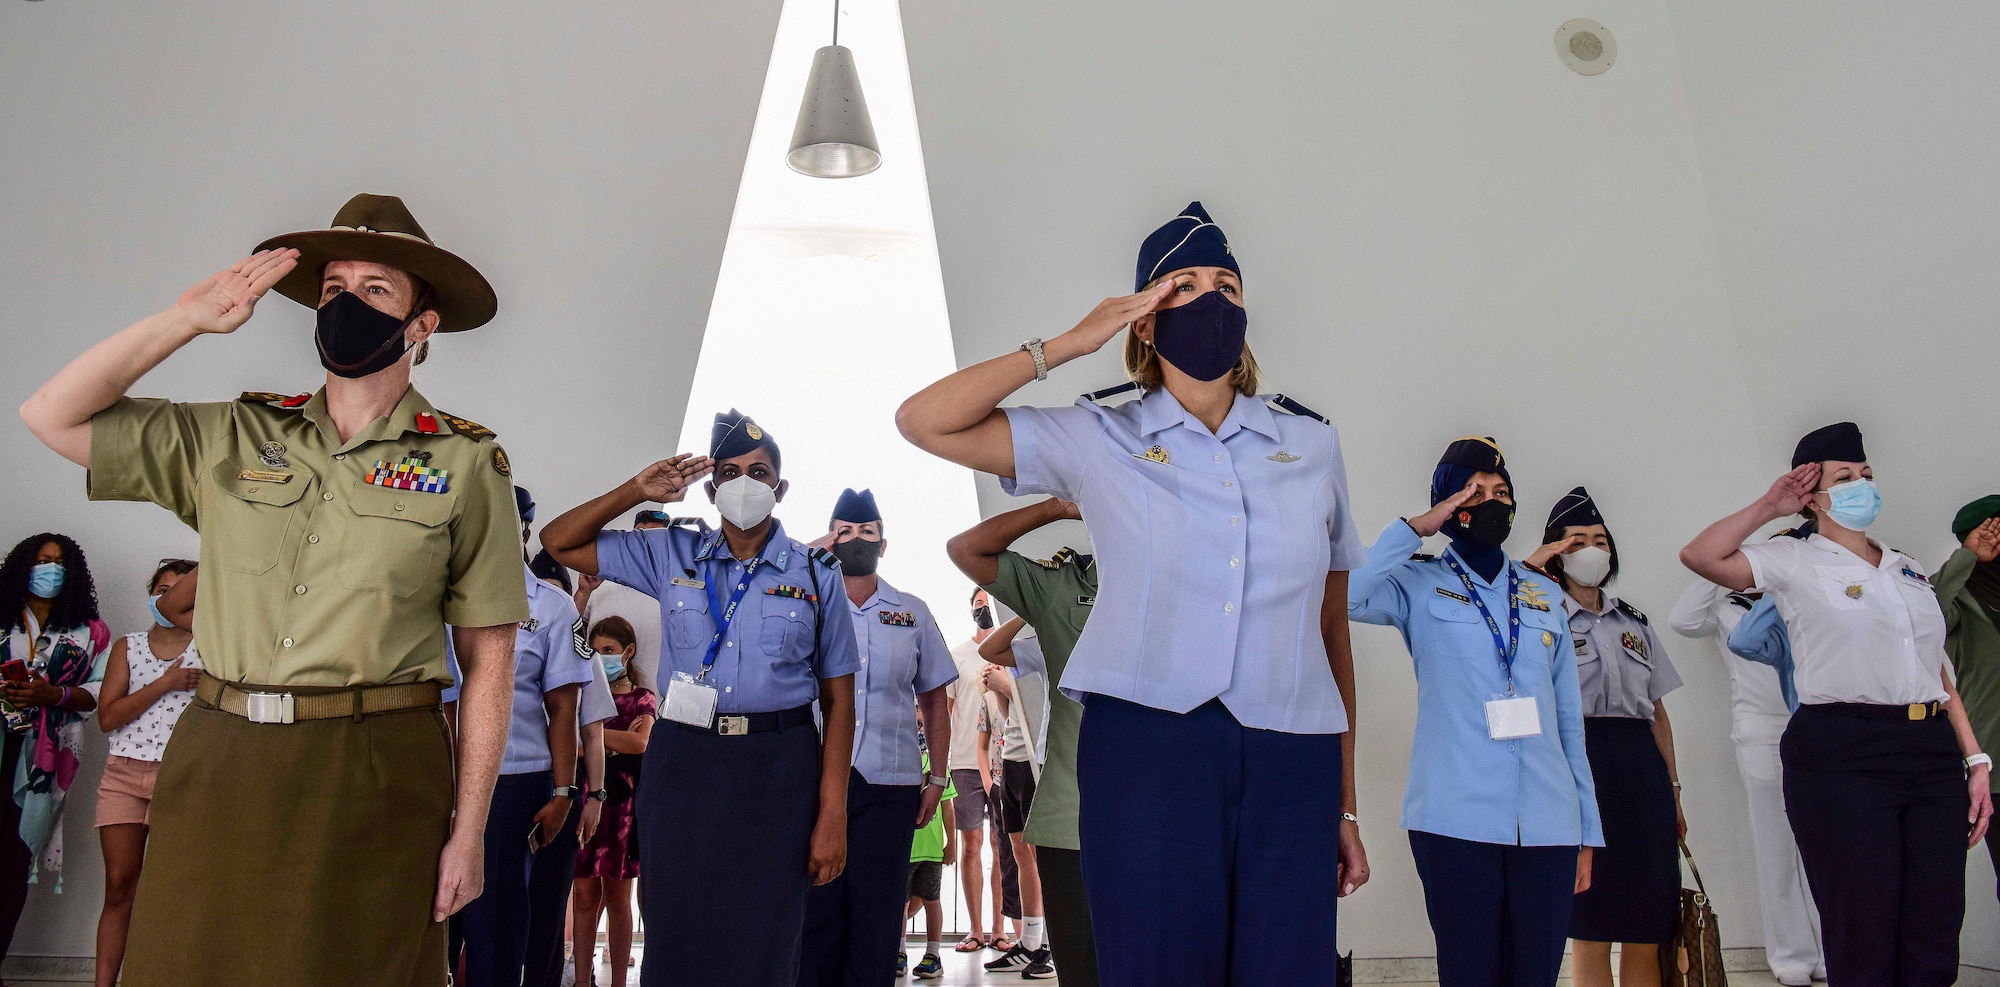 Australian Army Brigadier Nerolie McDonald, U.S. Indo-Pacific Command vice director for Intelligence, and U.S. Air Force Brig. Gen. Jennifer Short, Pacific Air Forces chief of staff, render salutes alongside a flight of multilateral Indo-Pacific partners during a visit to the U.S.S. Arizona Memorial, Honolulu, Hawaii, March 30, 2021. The memorial visit was organized as part of PACAF’s first Women, Peace, and Security symposium, which enabled PACAF Airmen to work alongside partner nations to ensure the safety, security, and the protection of human rights among women and girls, especially during conflict and crisis.